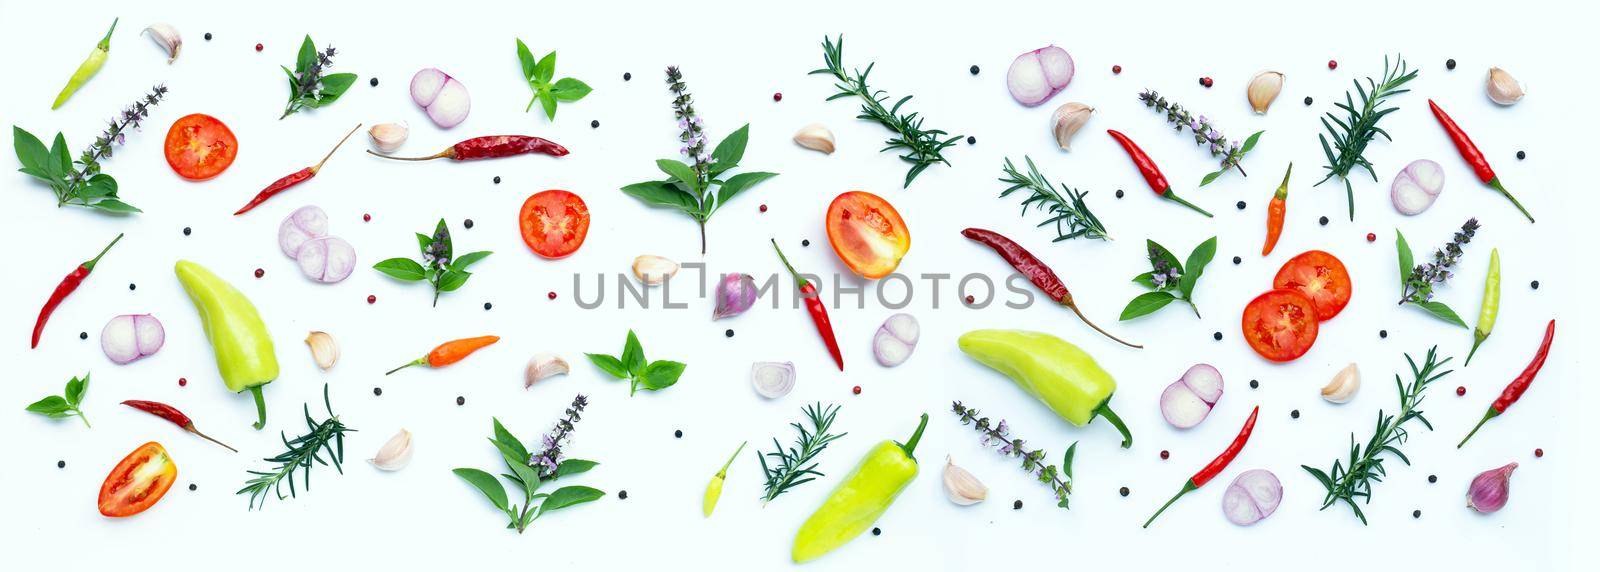 Cooking ingredients, Various fresh vegetables and herbs on white background. Healthy eating concept